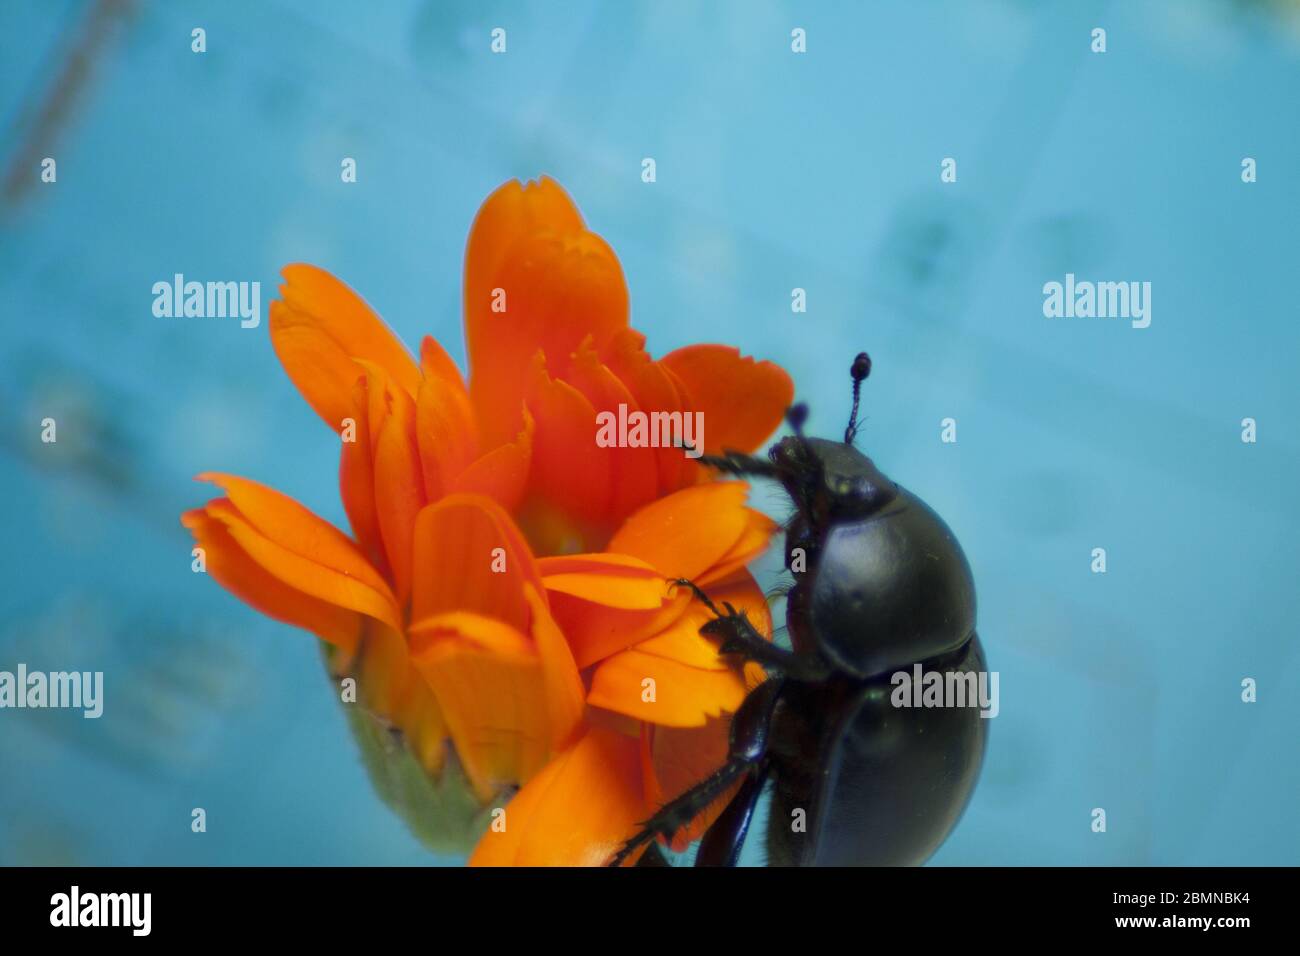 Dung beetle on an orange flower in close-up on a blue background. Stock Photo